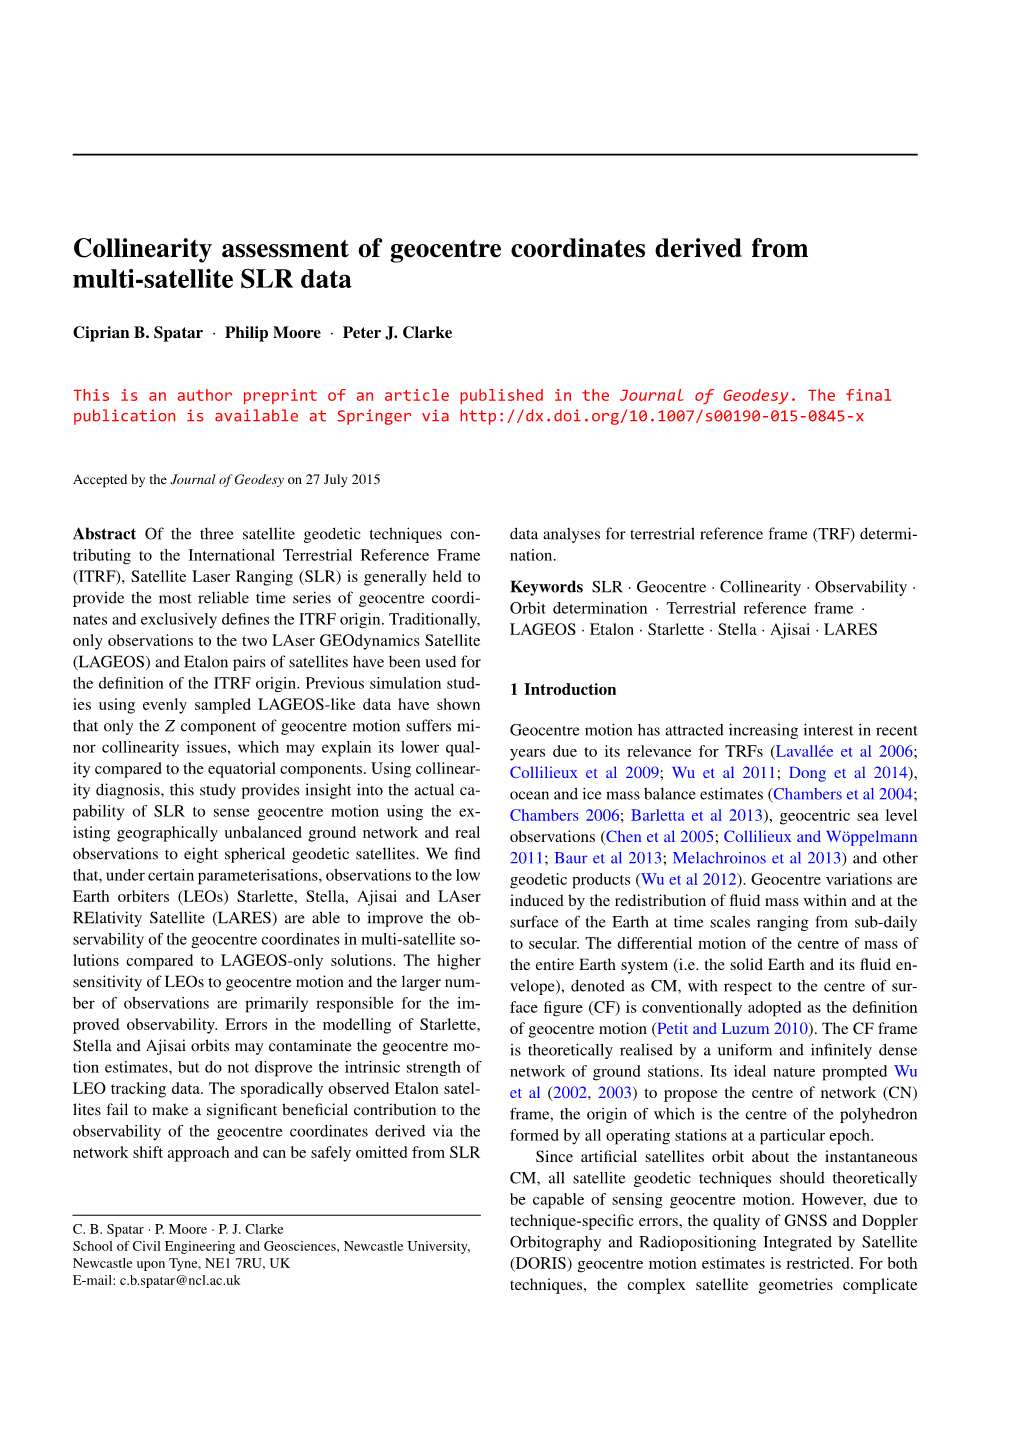 Collinearity Assessment of Geocentre Coordinates Derived from Multi-Satellite SLR Data